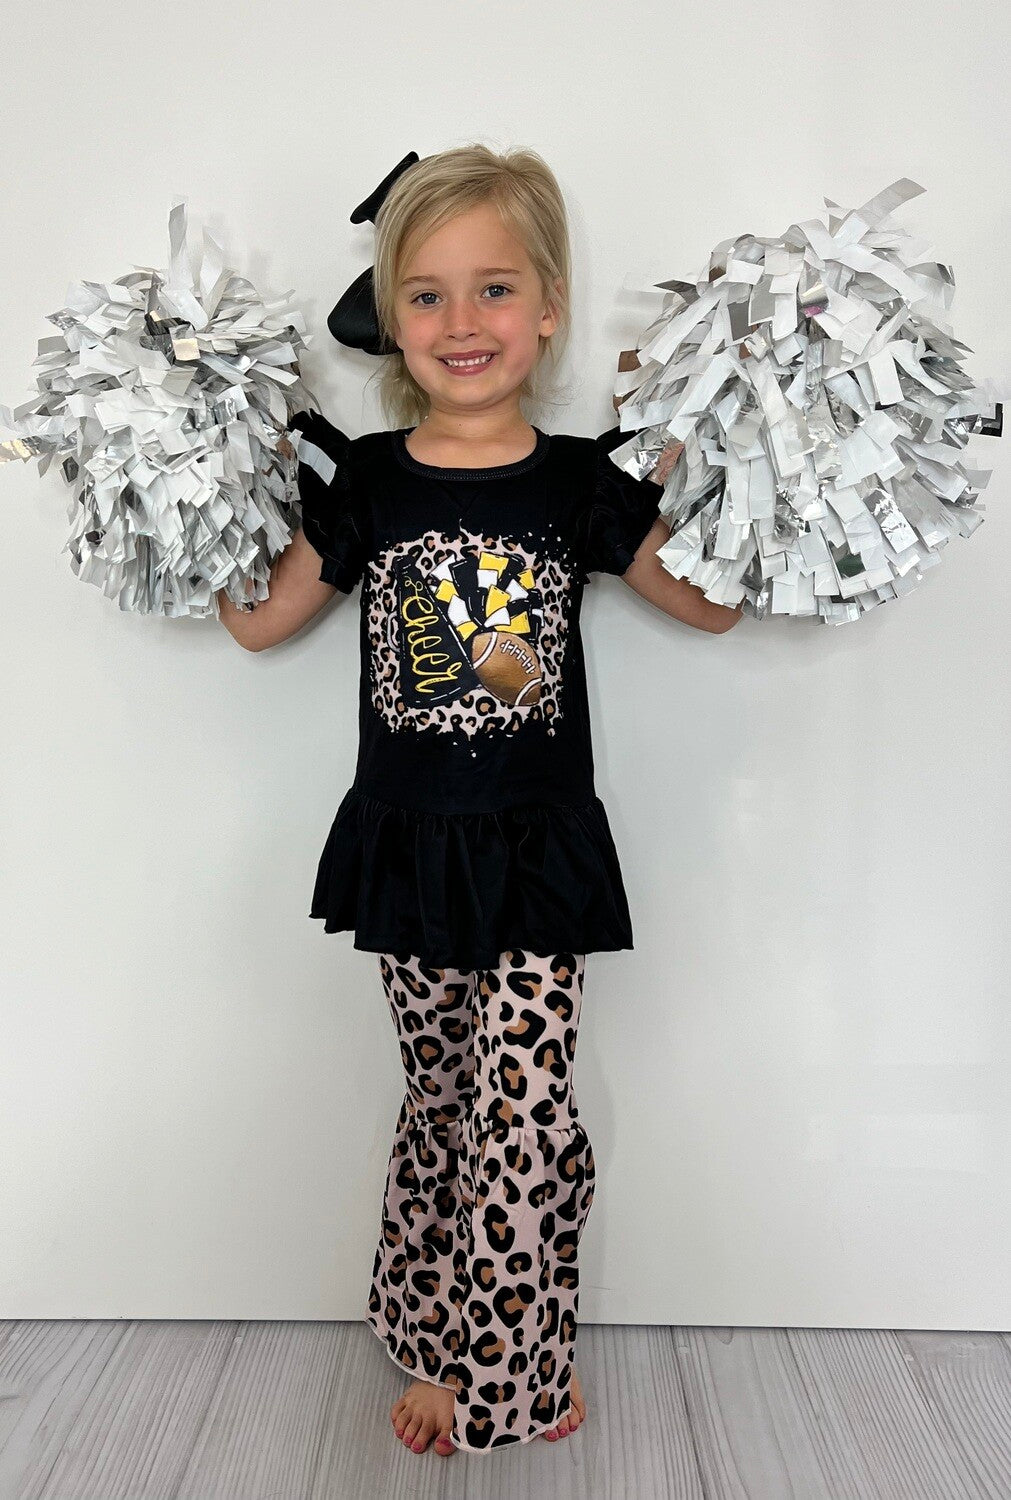 Toddler Leopard Cheer Outfit